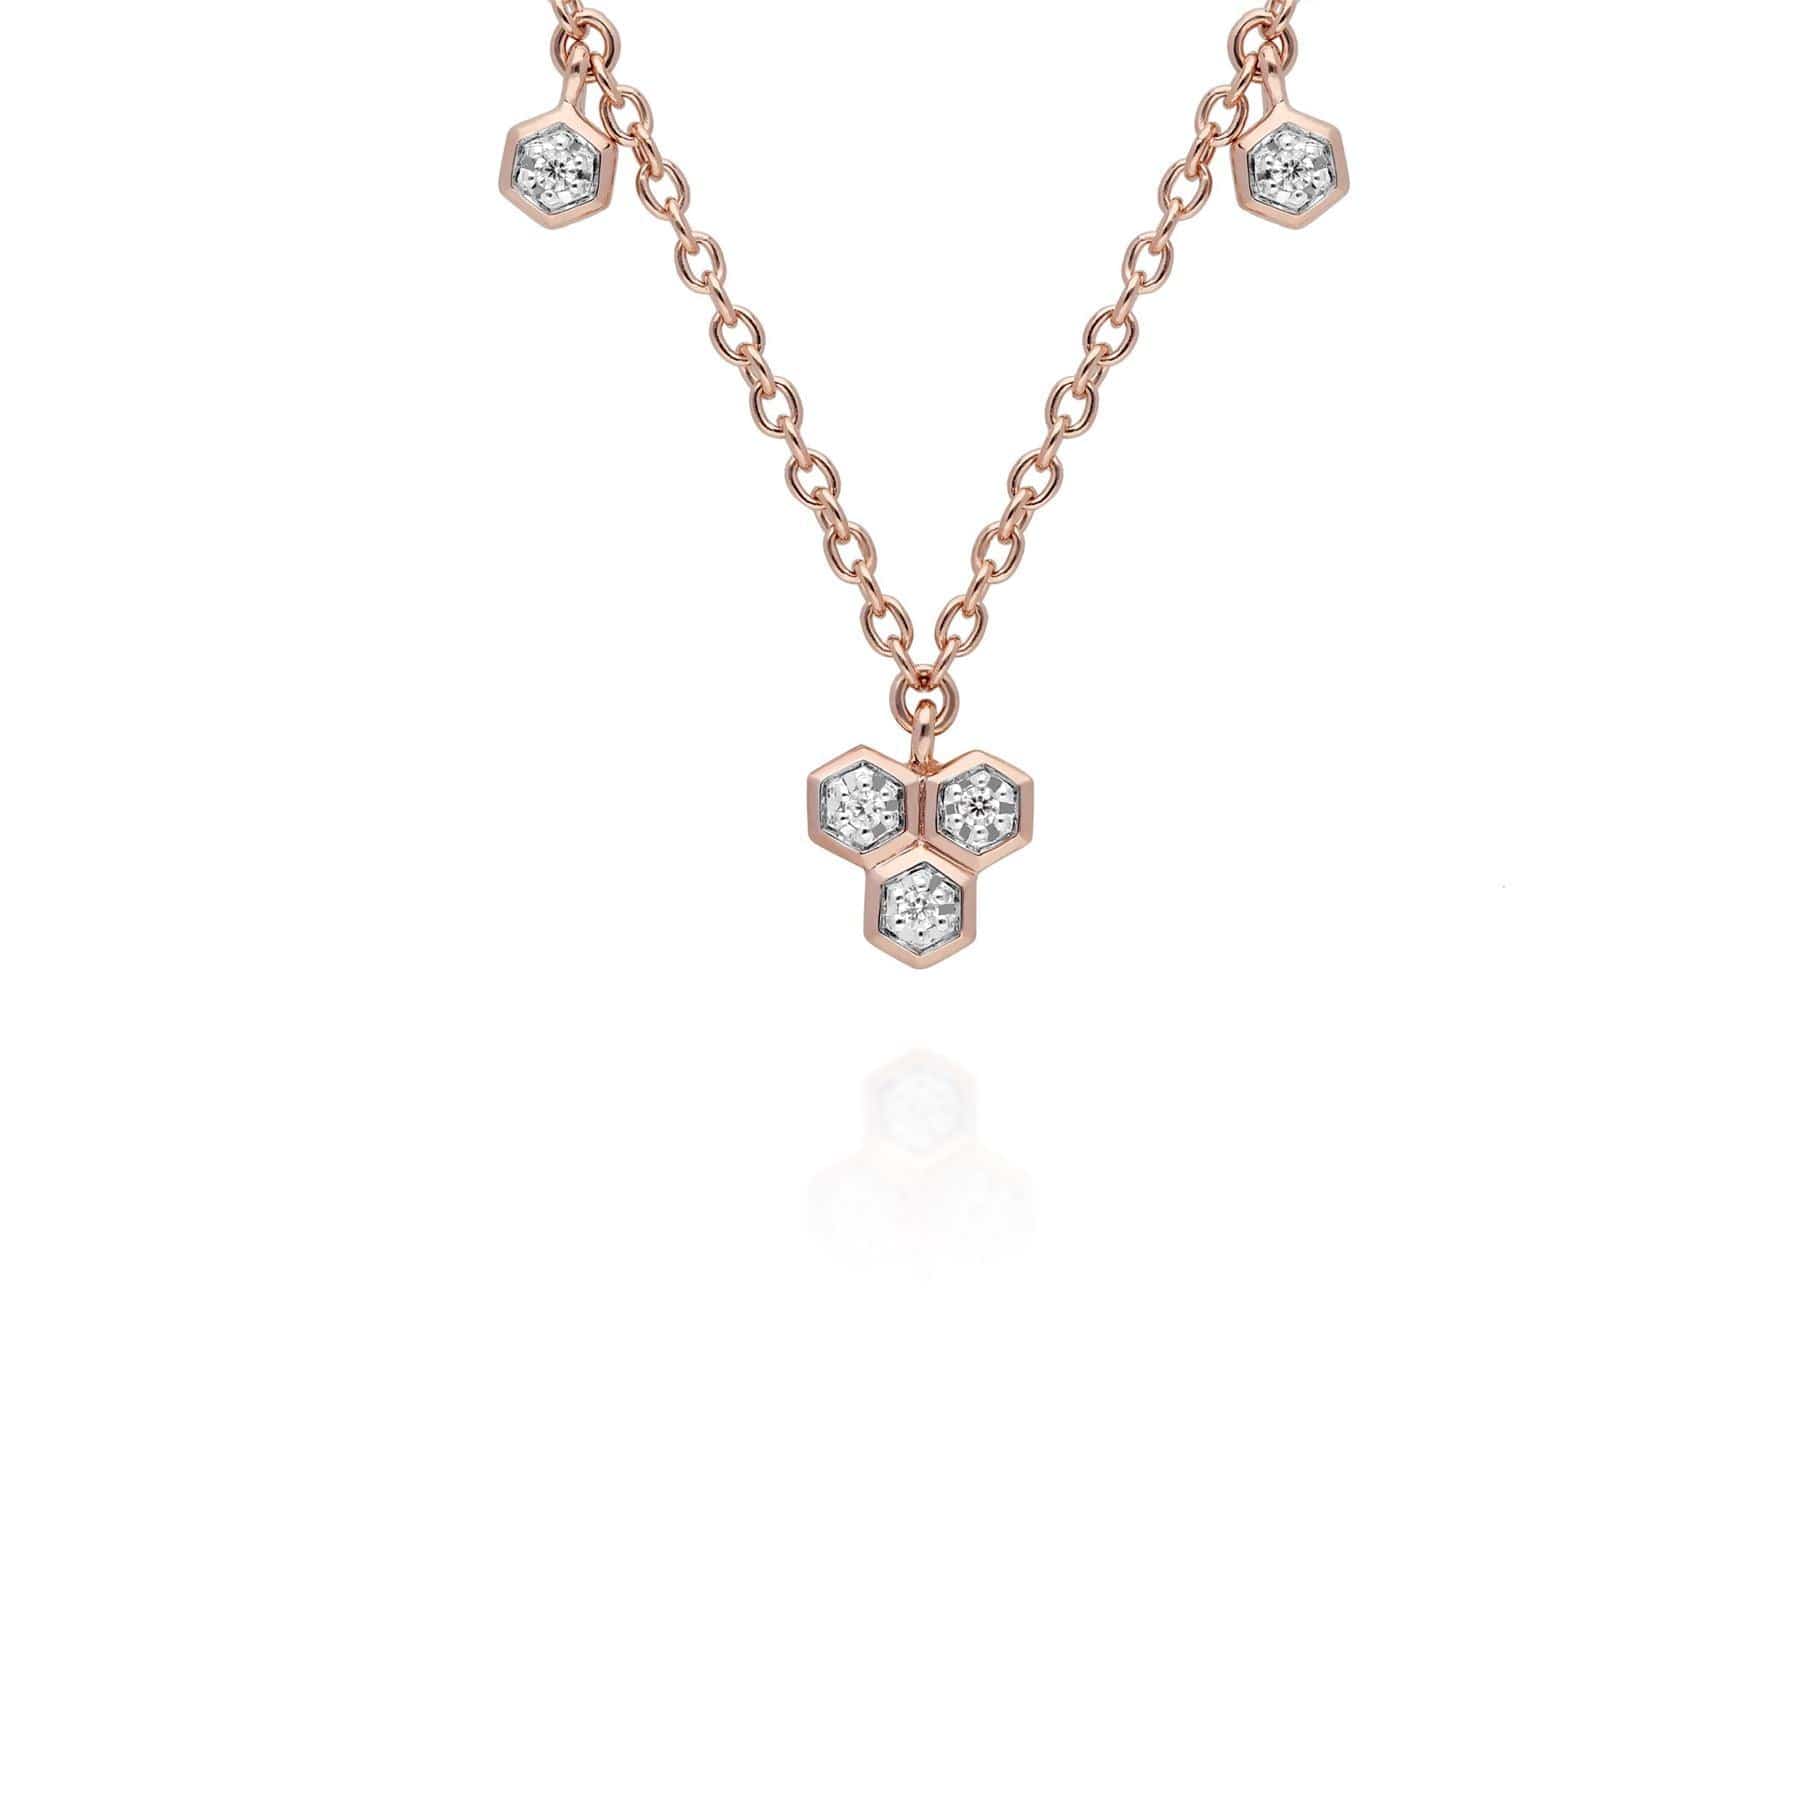 191N0227029-191E0394029 Diamond Trilogy Necklace & Stud Earring Set in 9ct Rose Gold 2